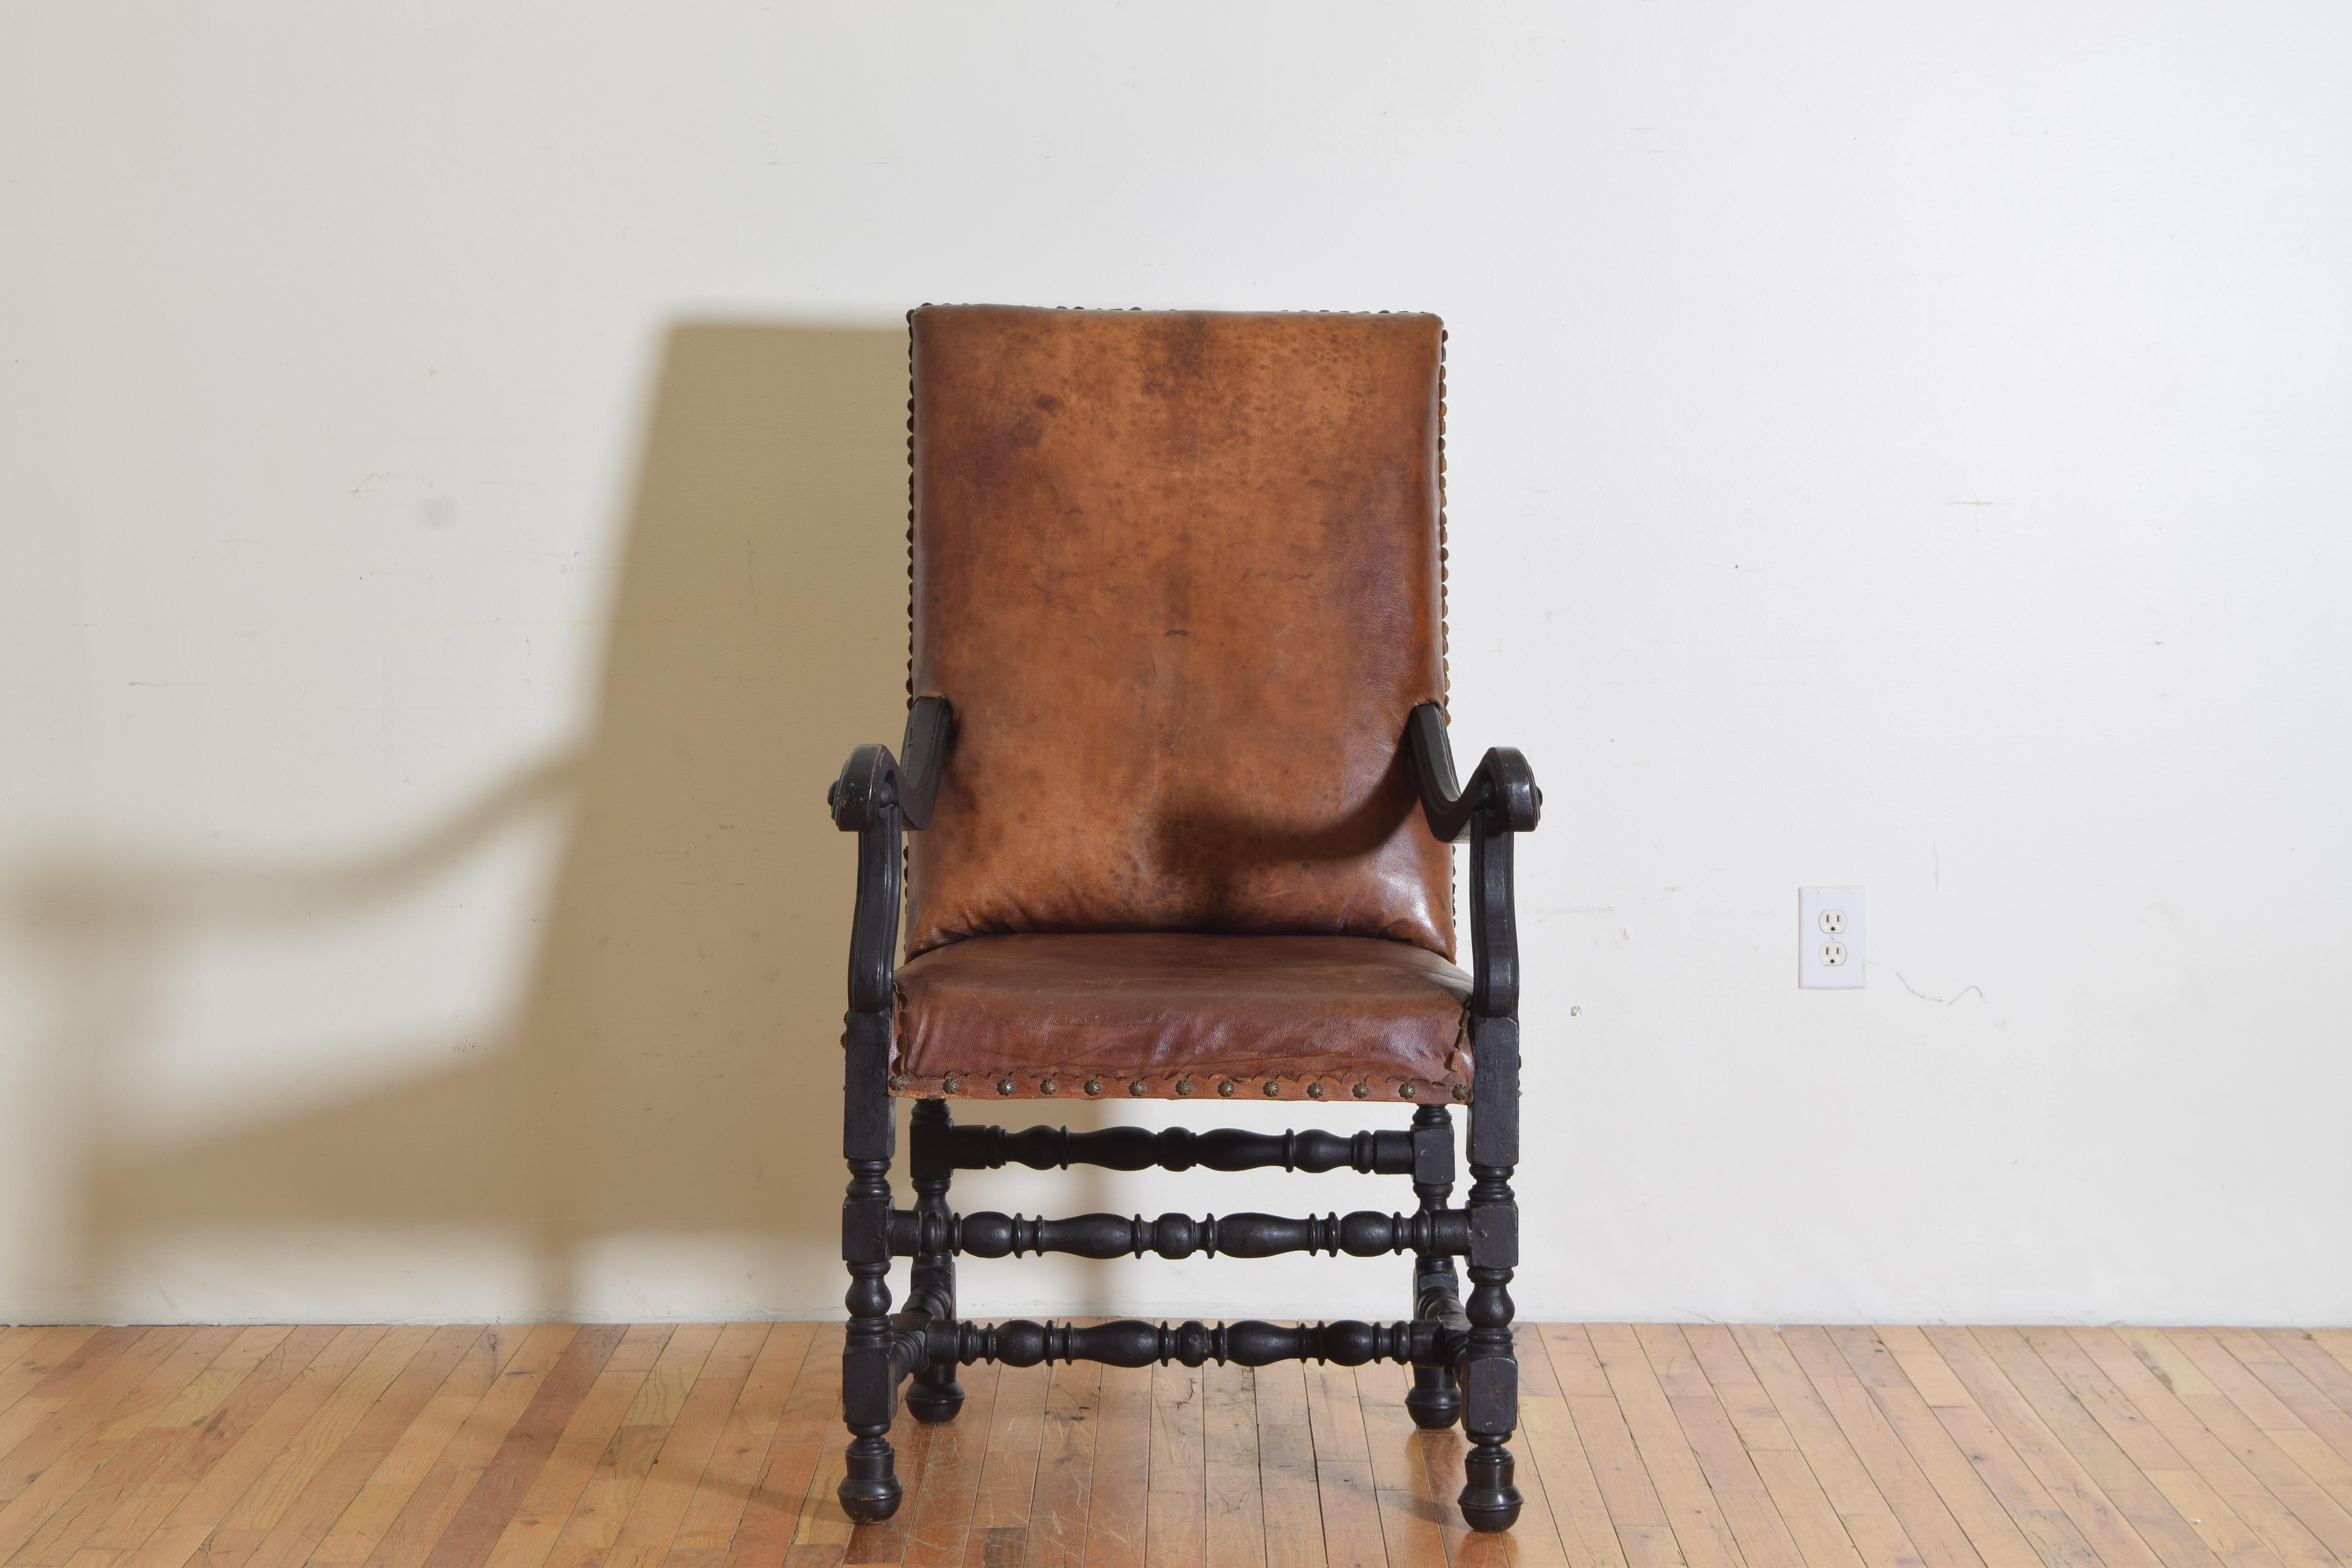 Italian Louis XIV Period Ebonized Walnut & Leather Upholstered Armchair, 18thc In Good Condition For Sale In Atlanta, GA